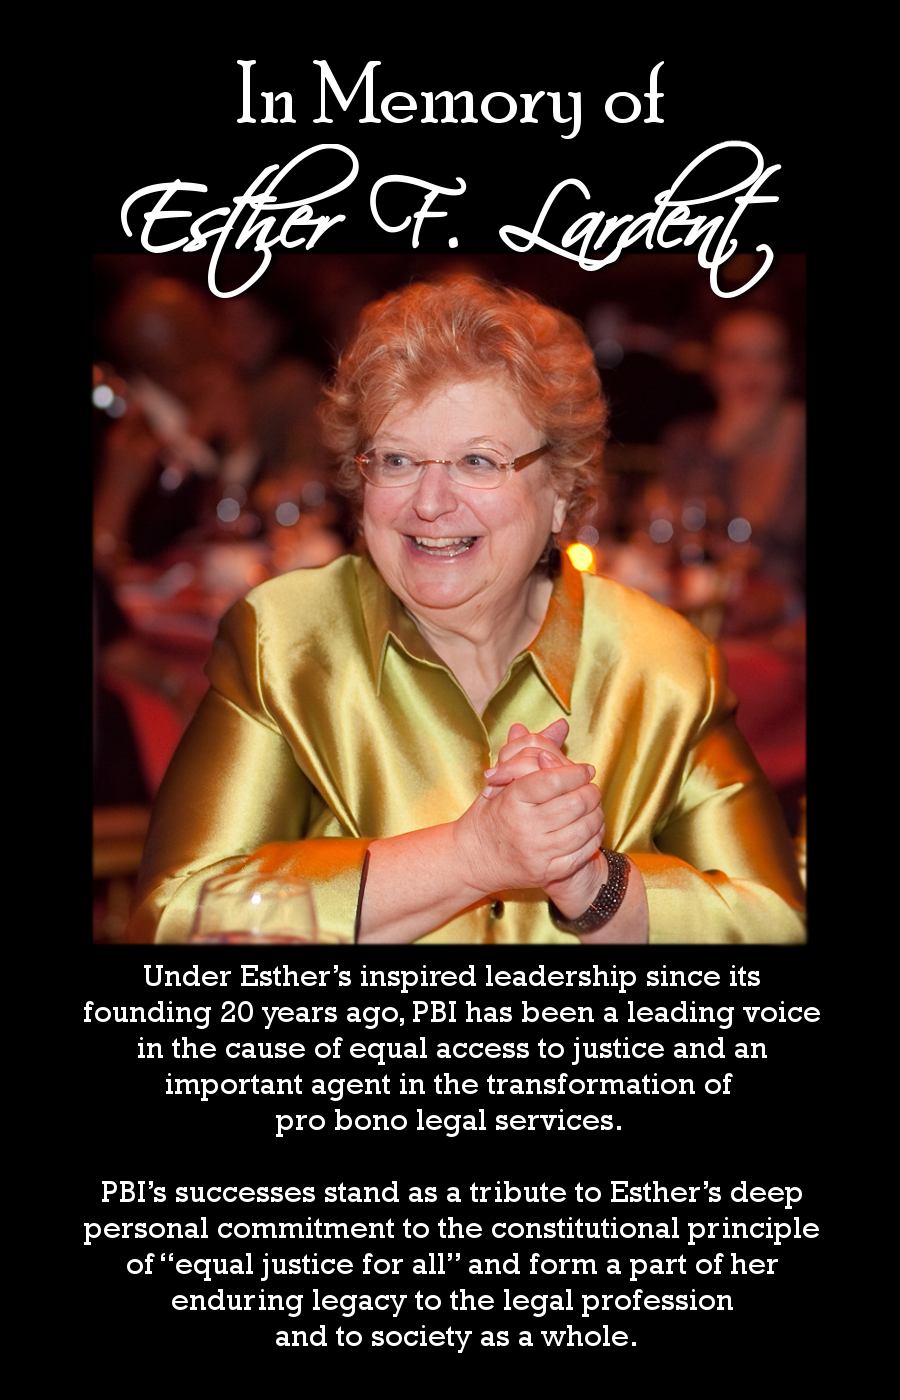 In Memory of Esther F. Lardent